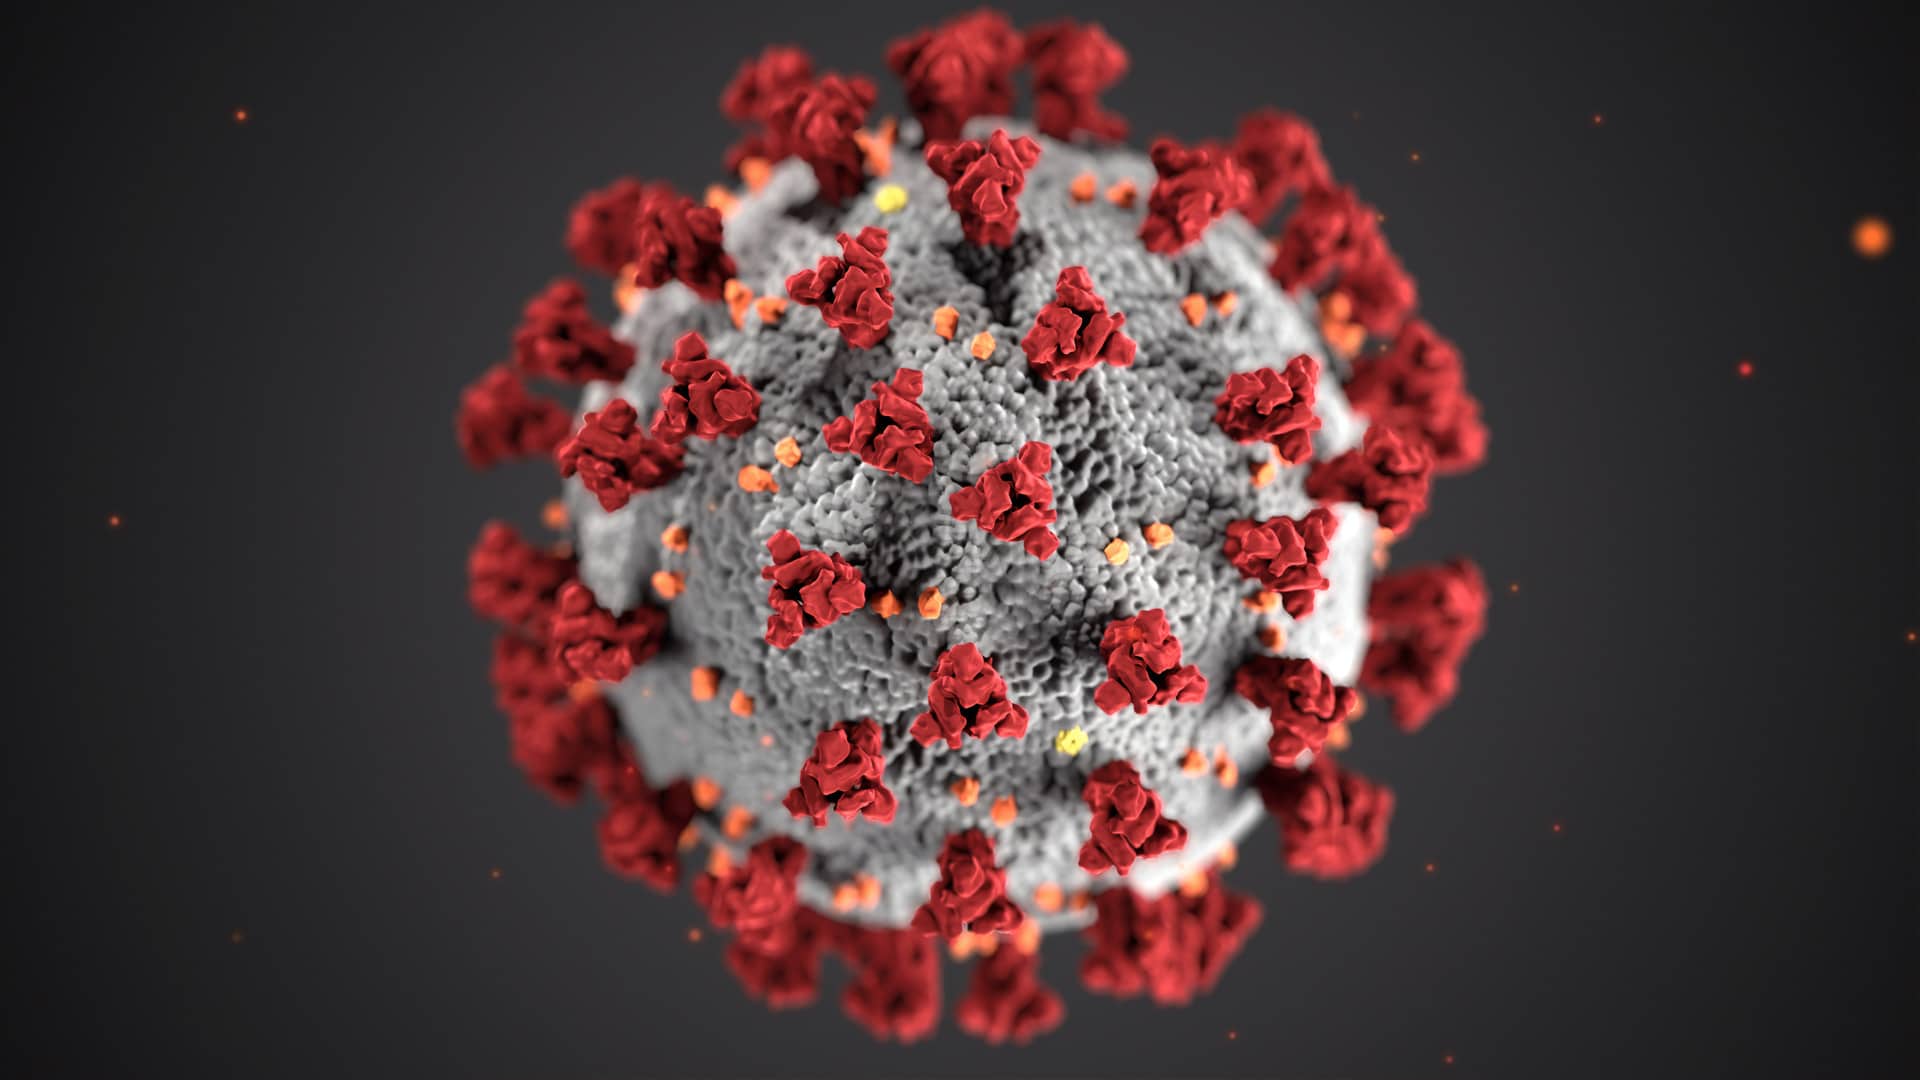 Coronavirus disease (COVID-19) is an infectious disease caused by a new virus.